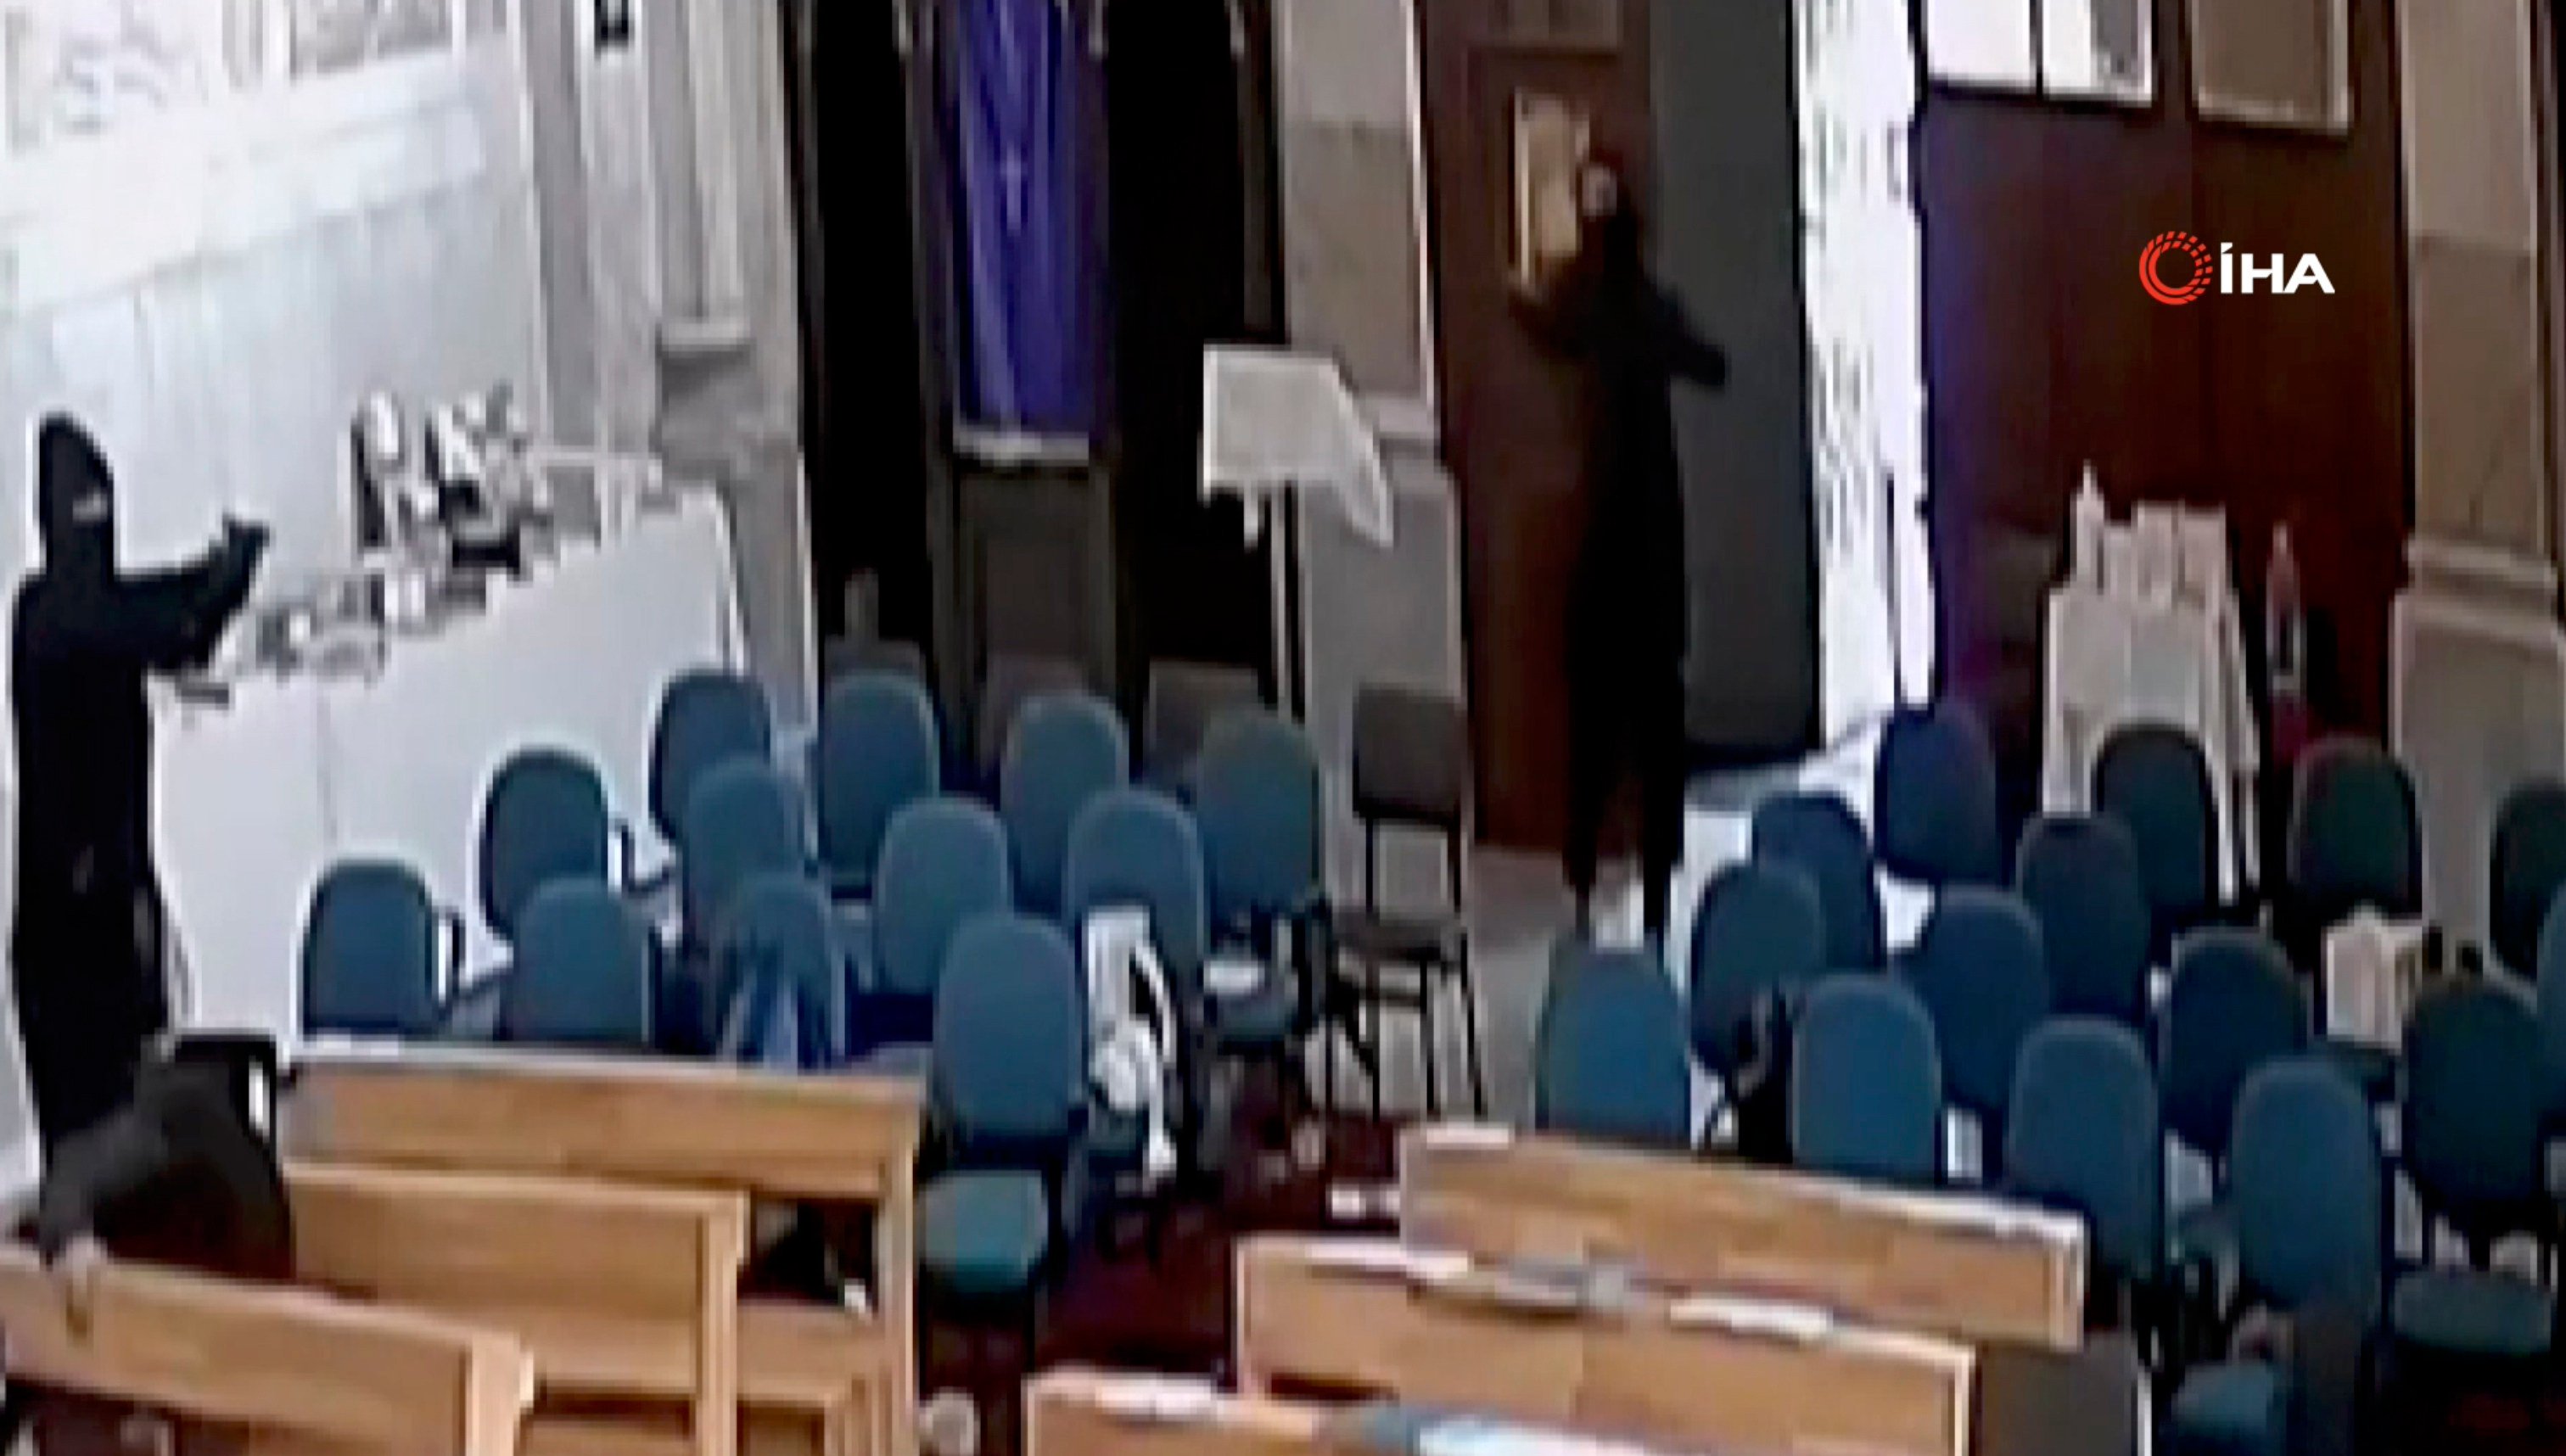 A screenshoot from video footage taken from a CCTV camera shows two masked men holding guns inside Santa Maria church in Istanbul, Turkey on Sunday. Photo: IHA via AP